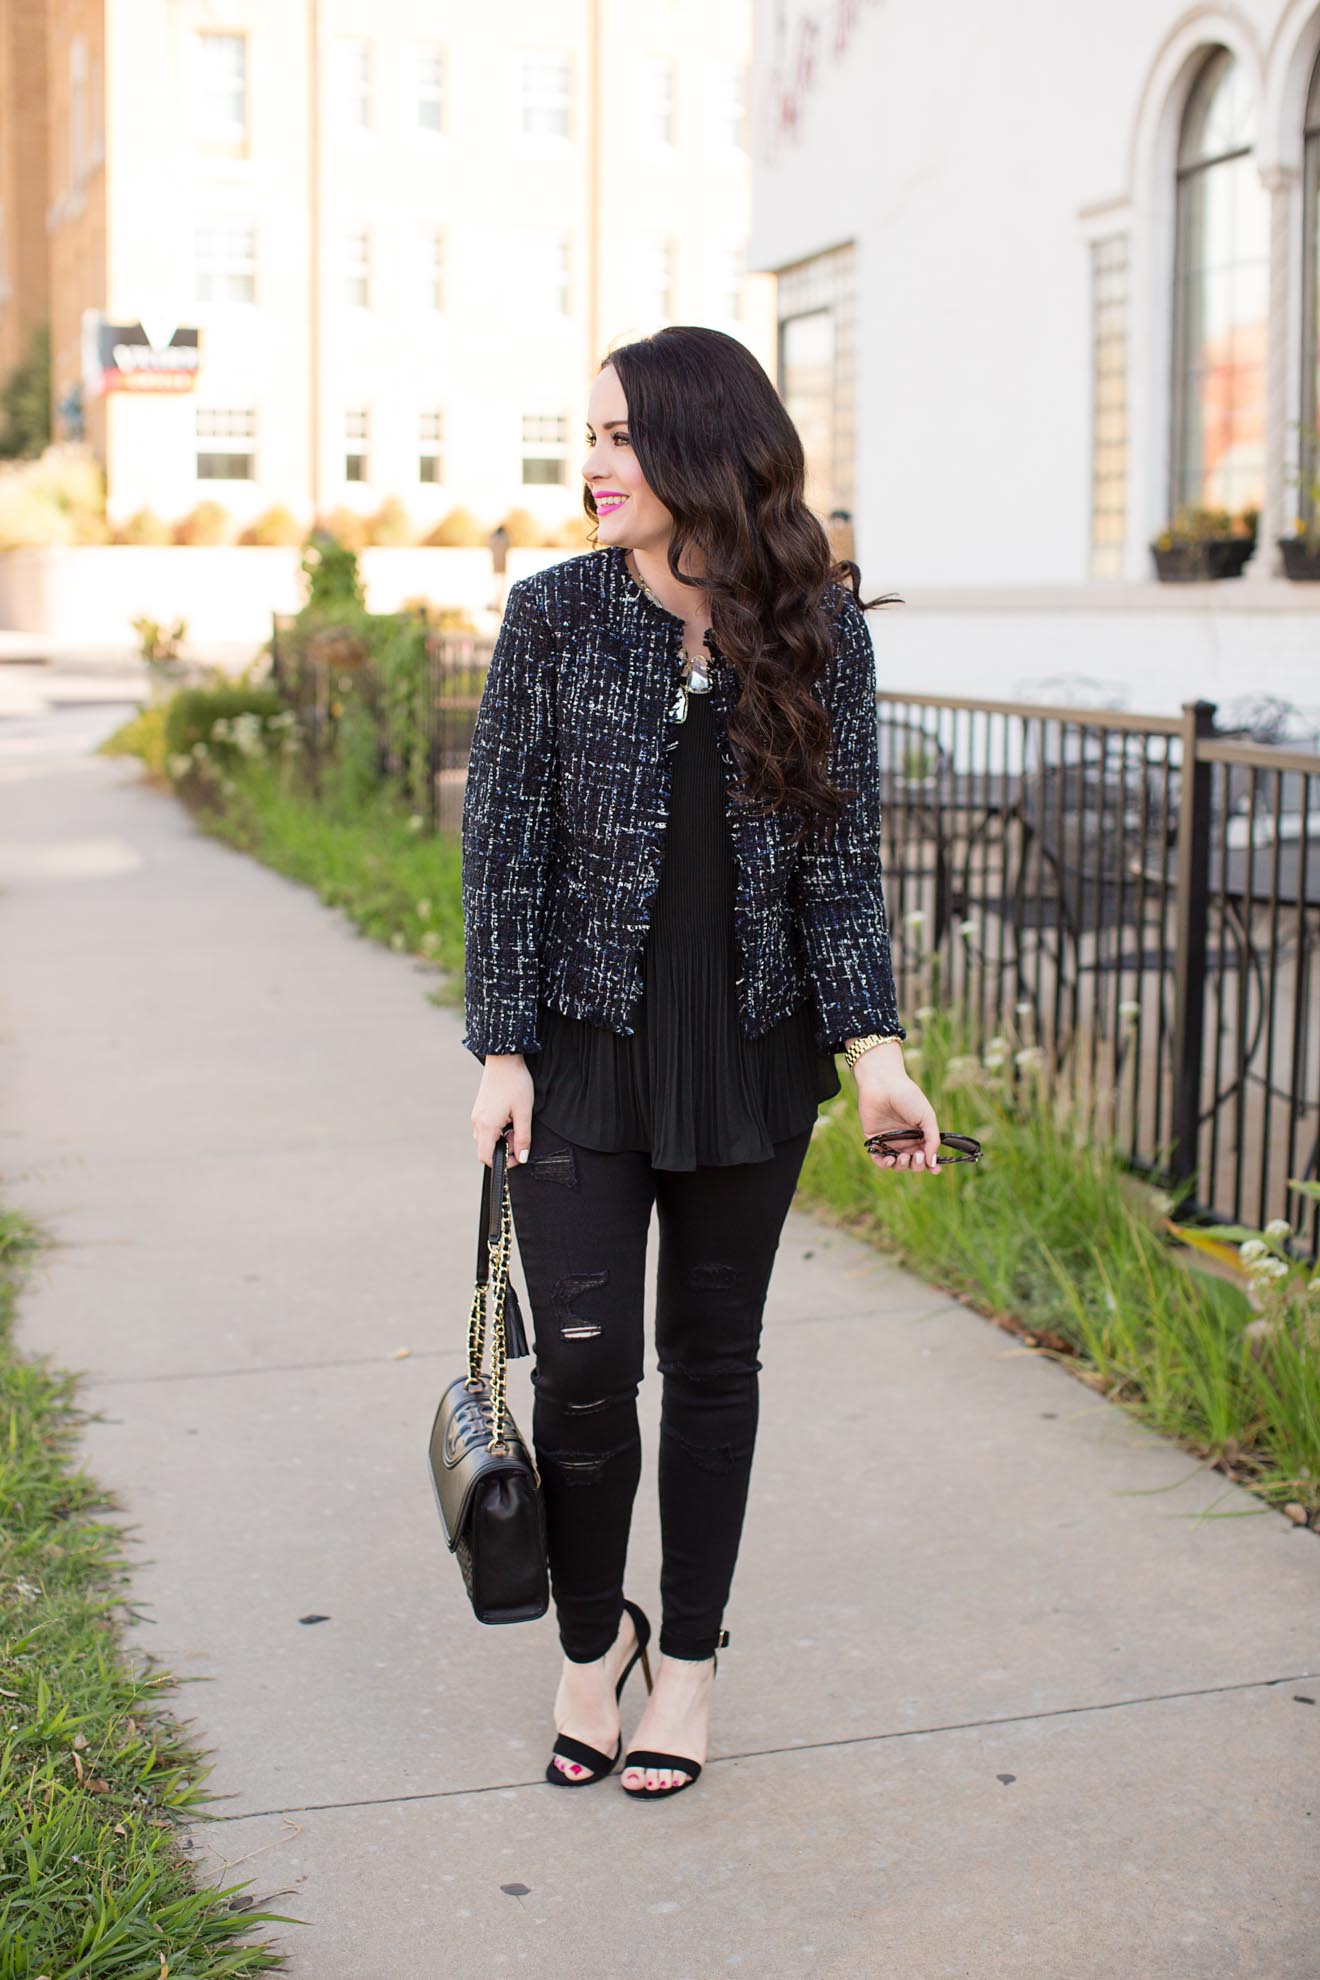 Black Leather Leggings with Tweed Jacket Outfits (2 ideas & outfits)